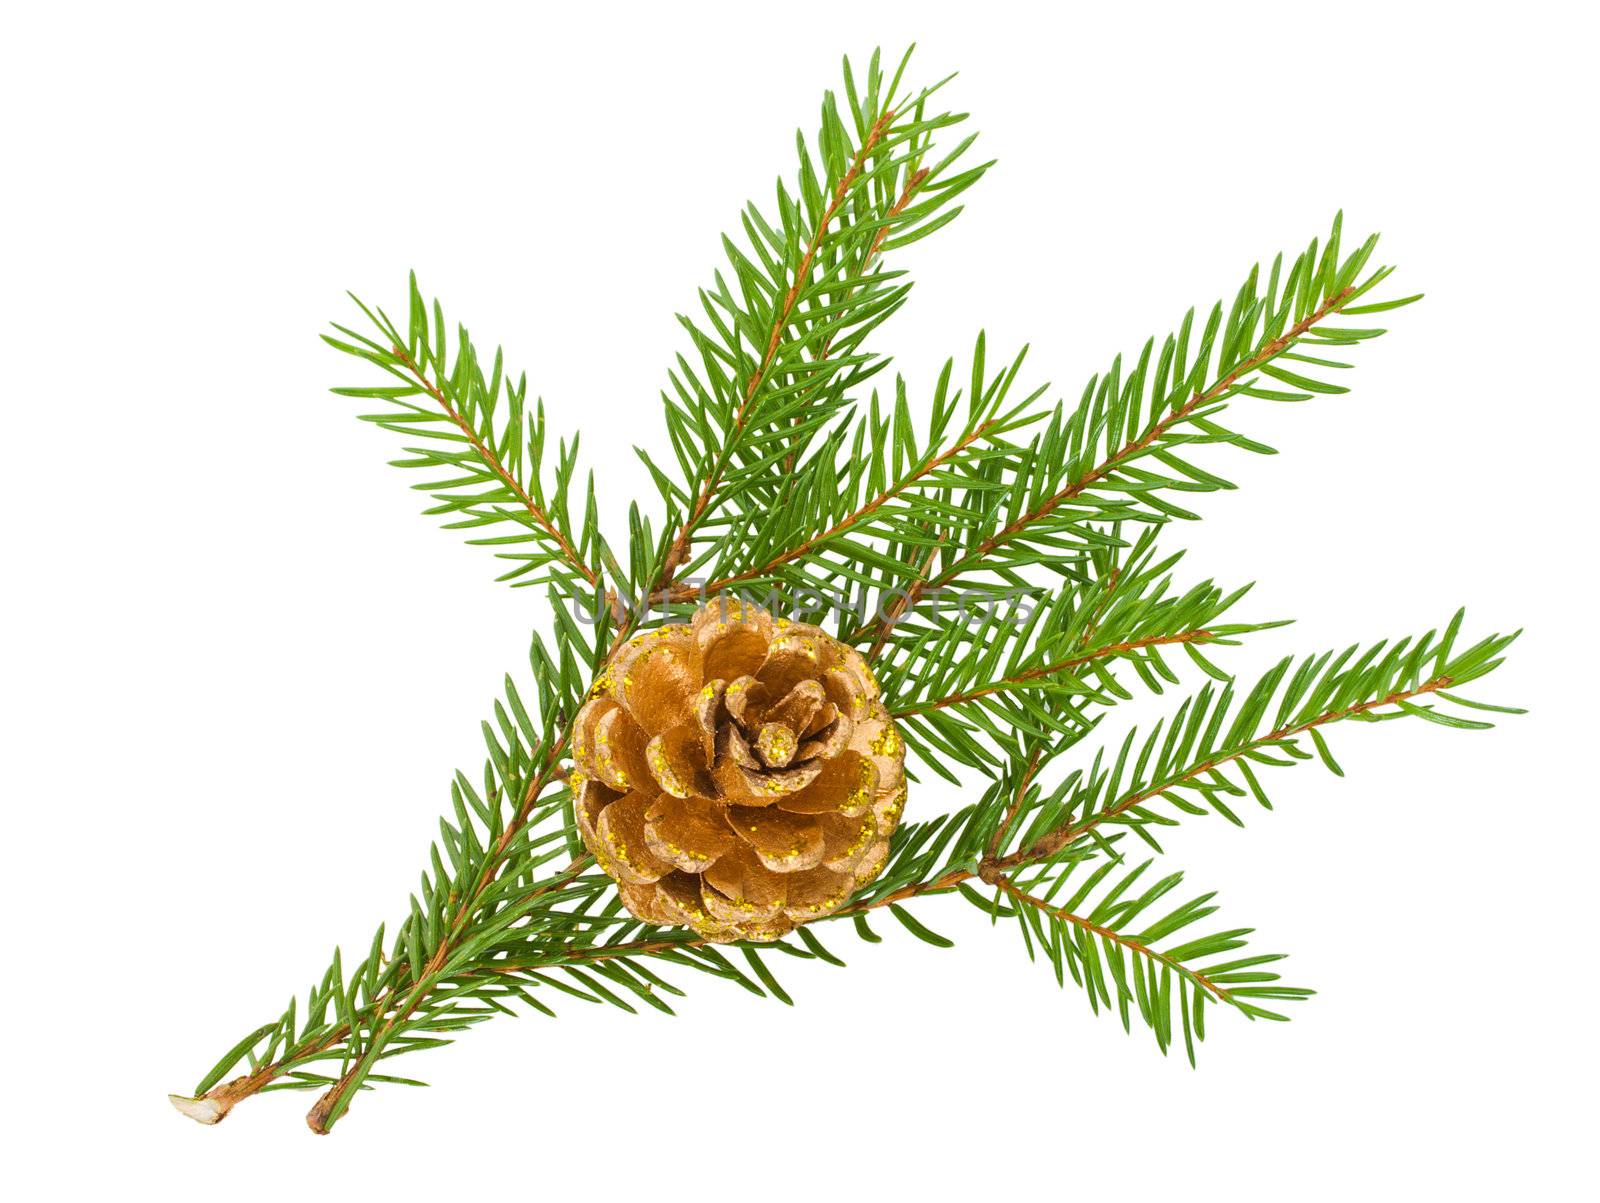 fir branch with cone by Alekcey